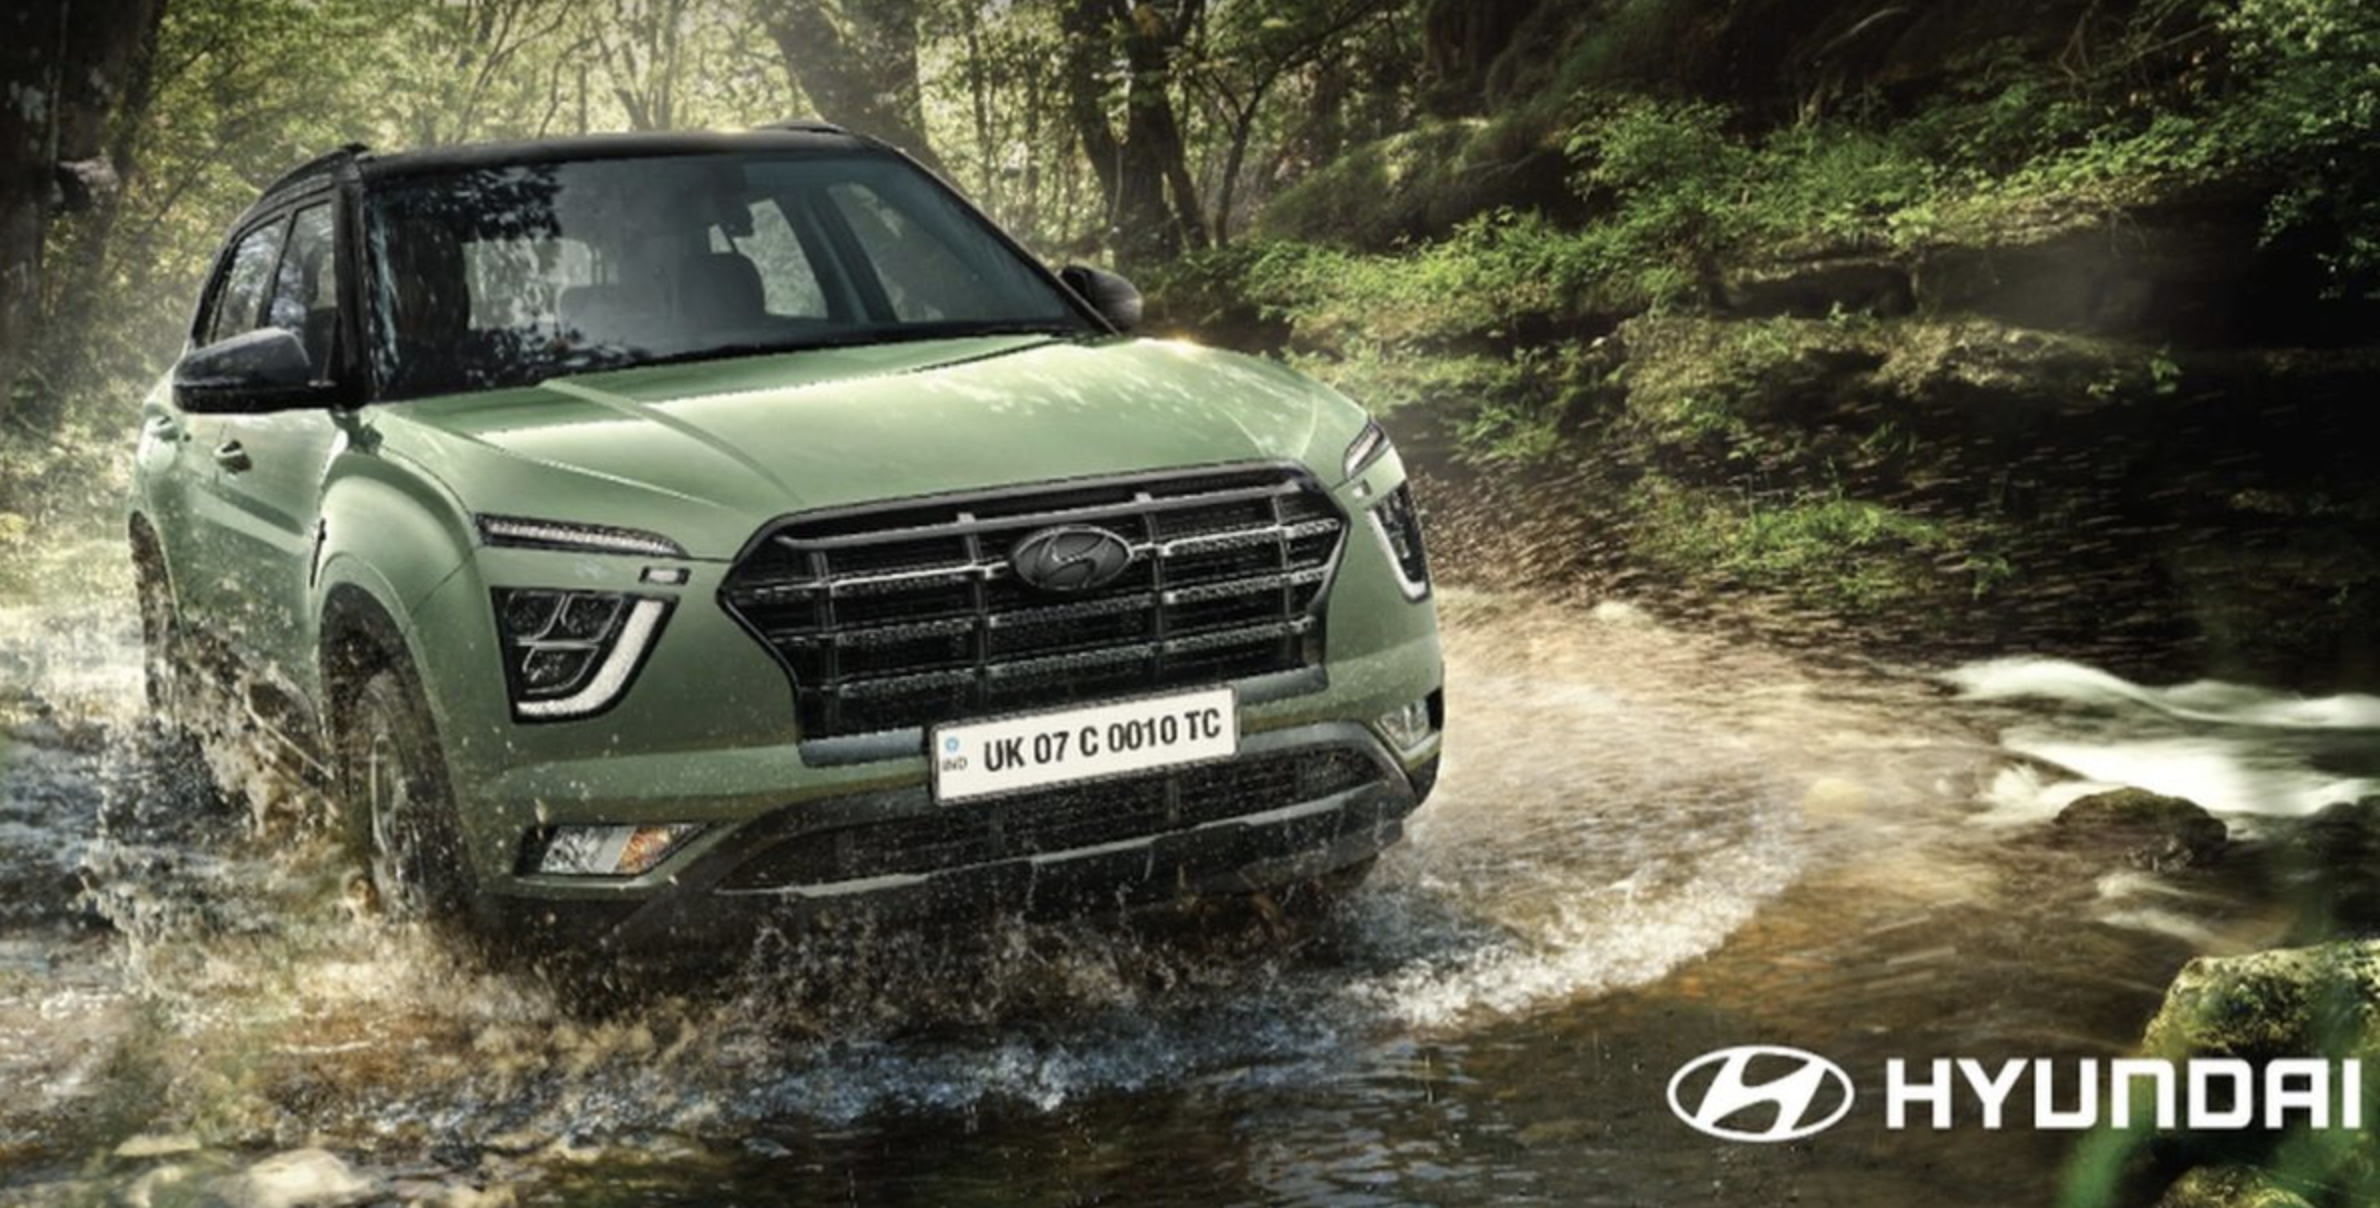 Hyundai Creta, Alcazar Adventure Edition Launched With New Features: Check Price, Variants, USPs & More